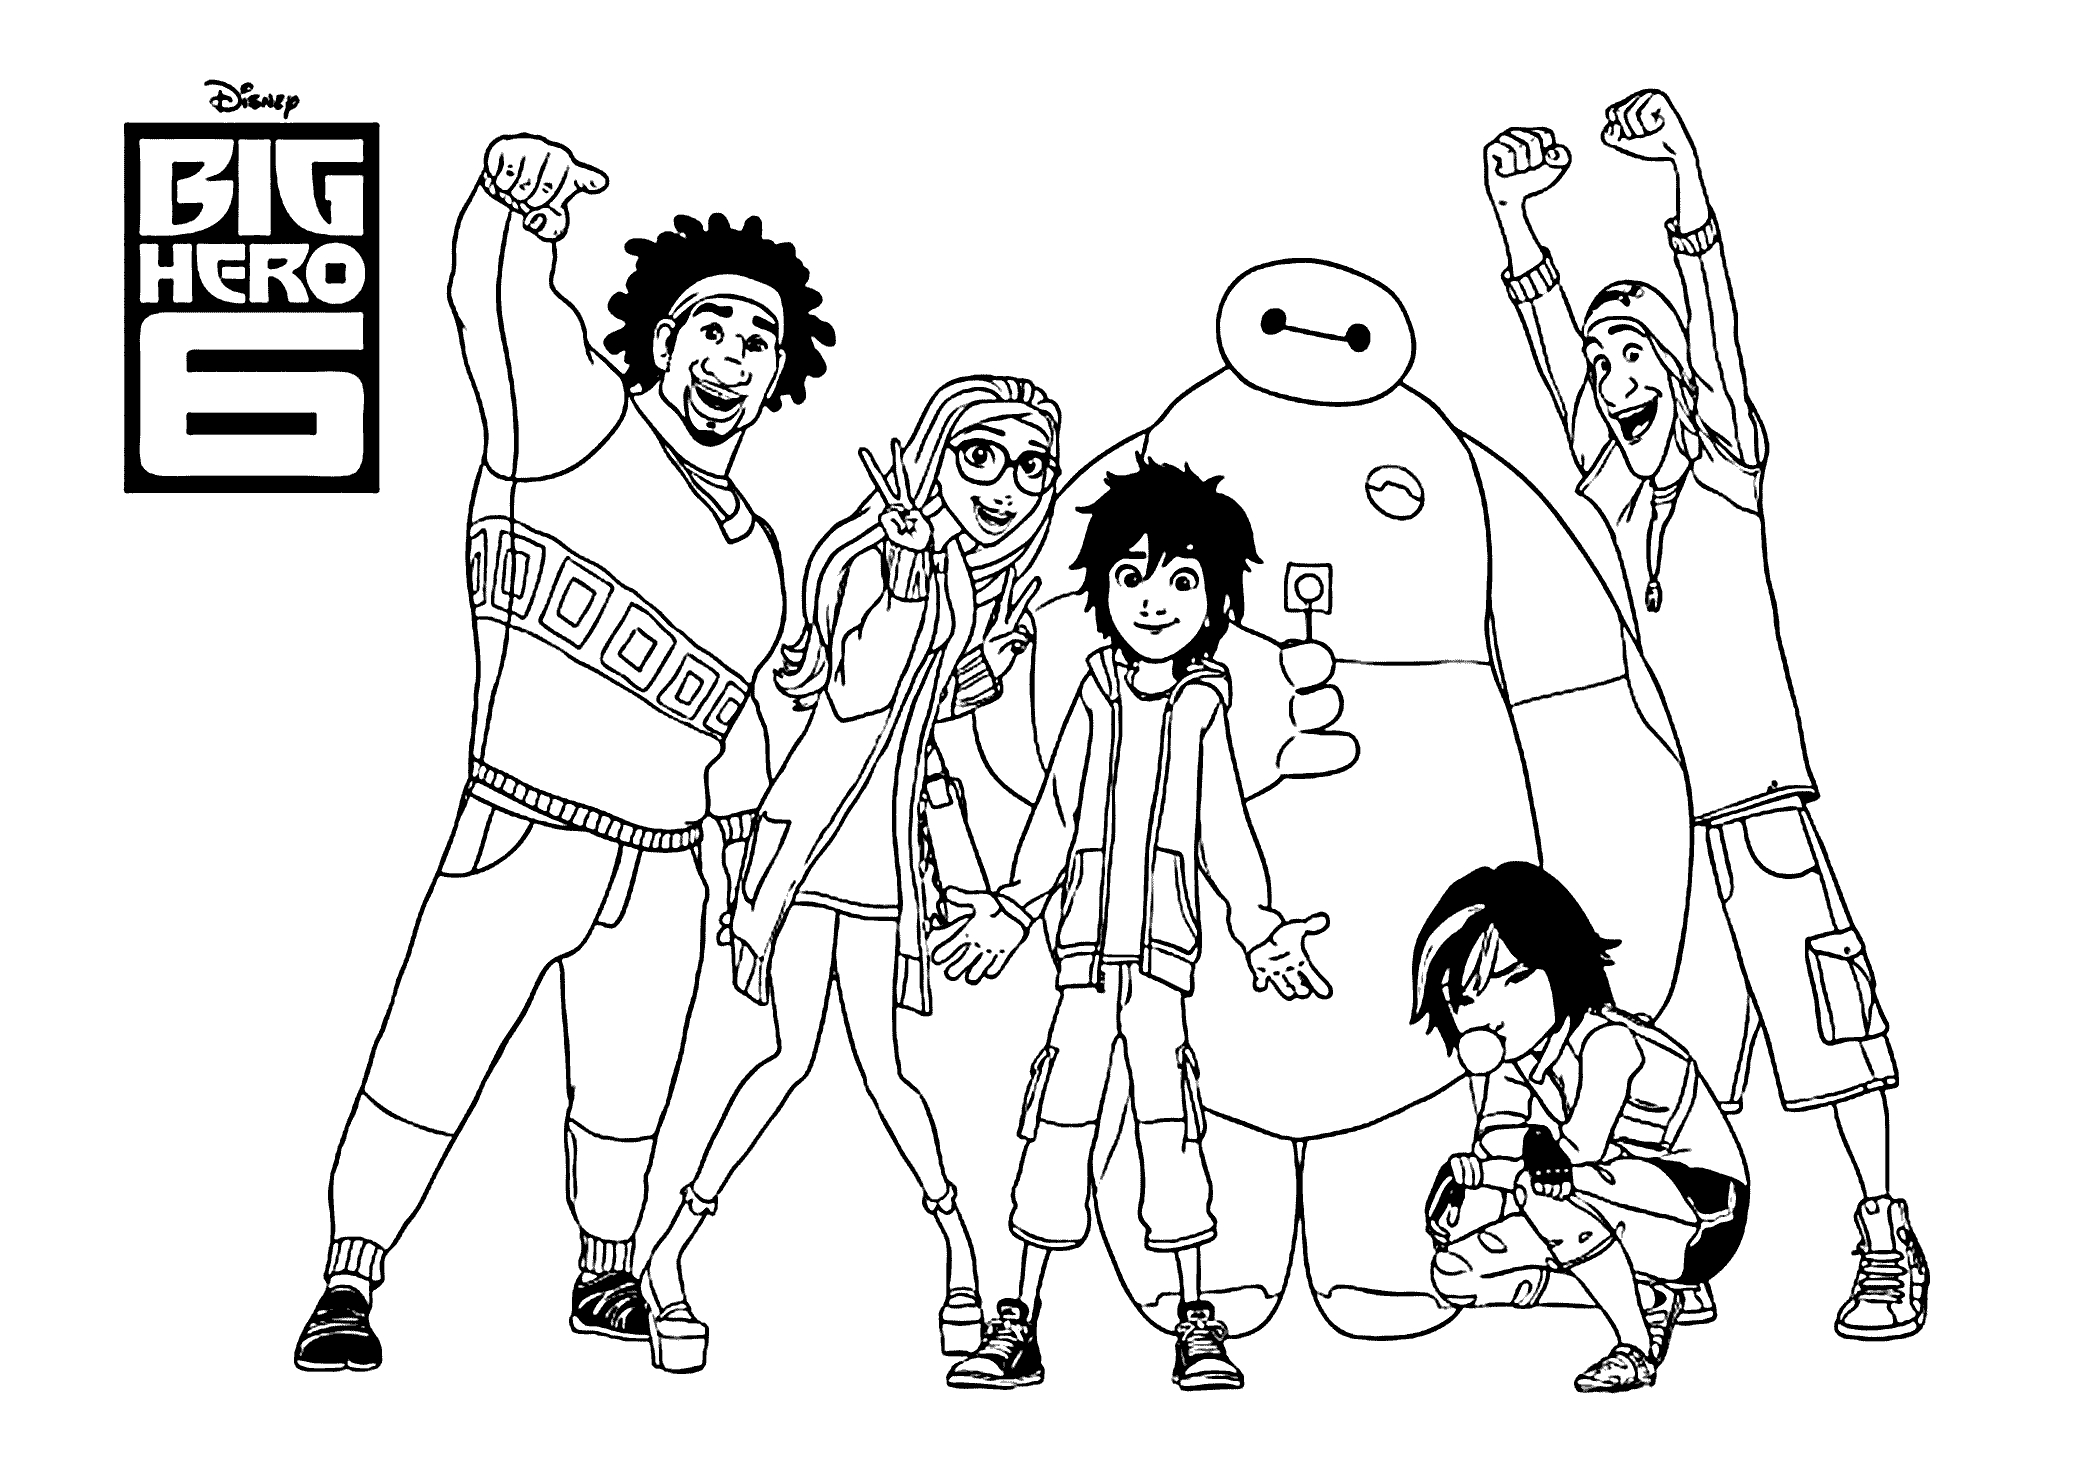 Big Hero 6 Coloring Pages Pdf - Сoloring Pages For All Ages